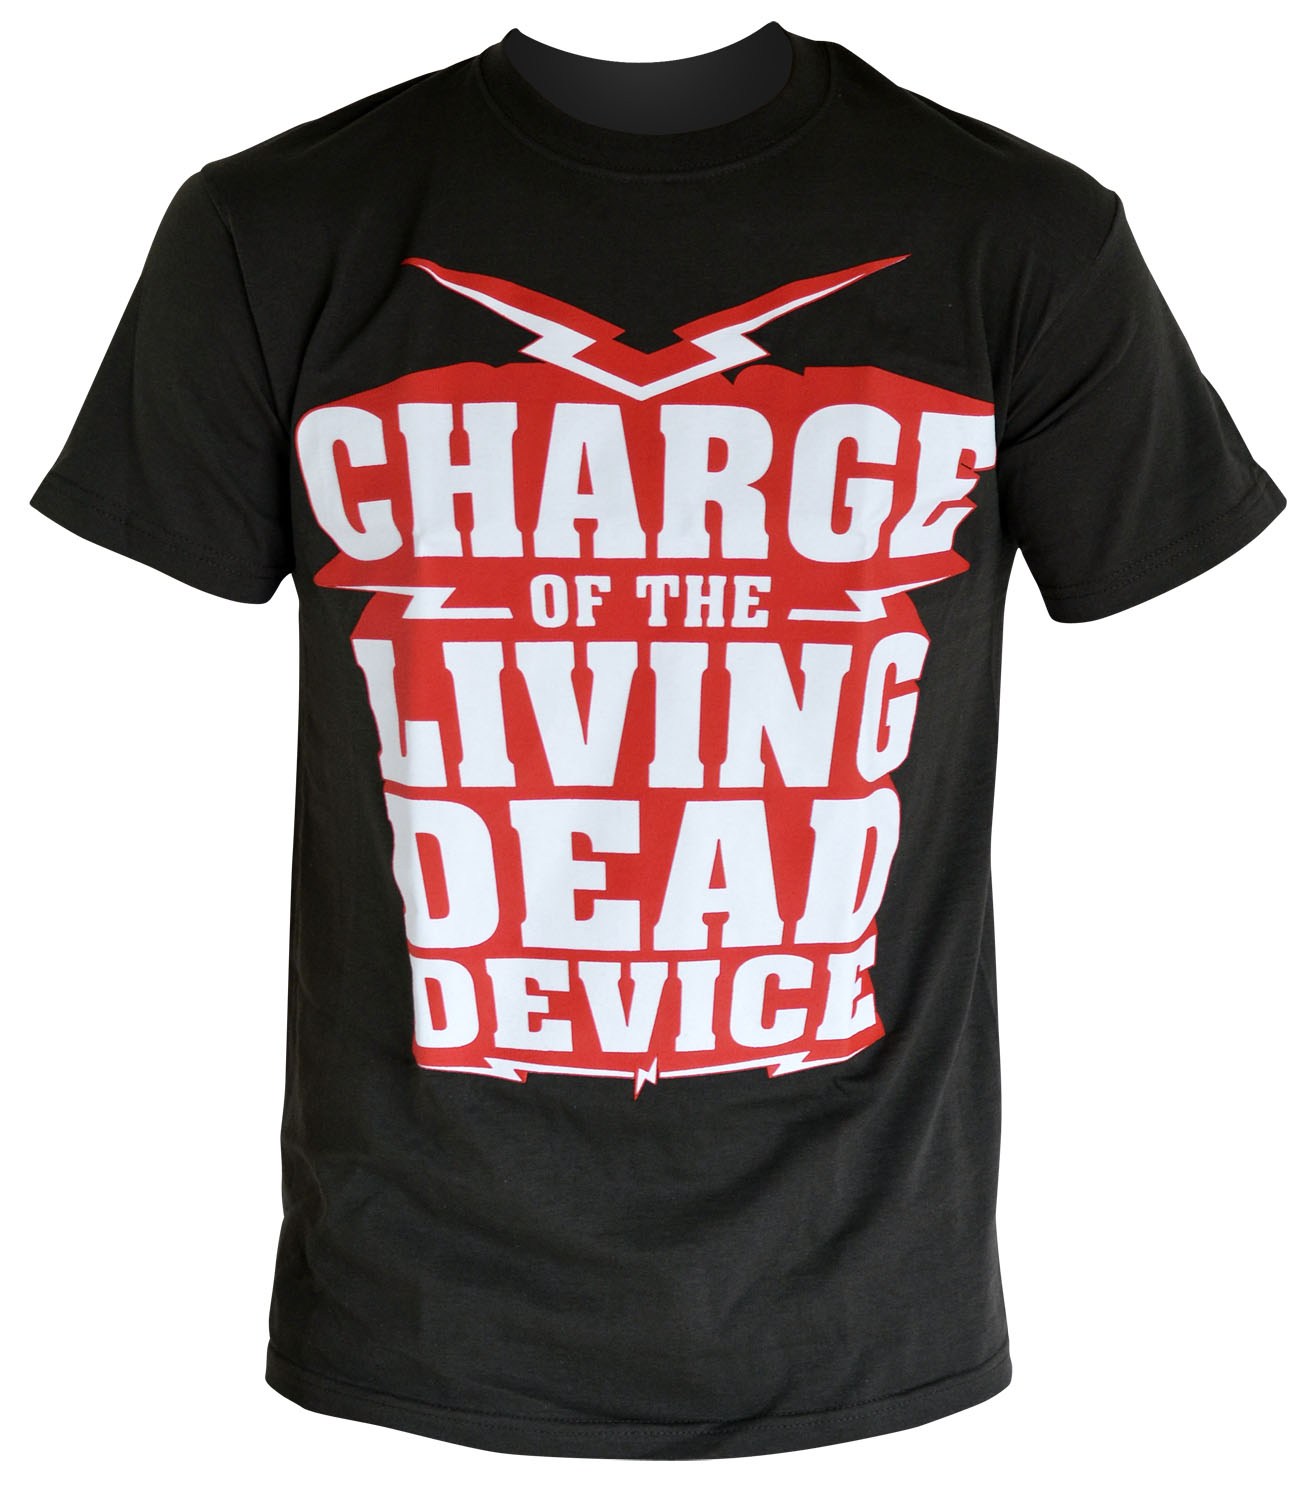 t-shirt_-_charge_of_the_living_dead_device_-_grey_front Kopie